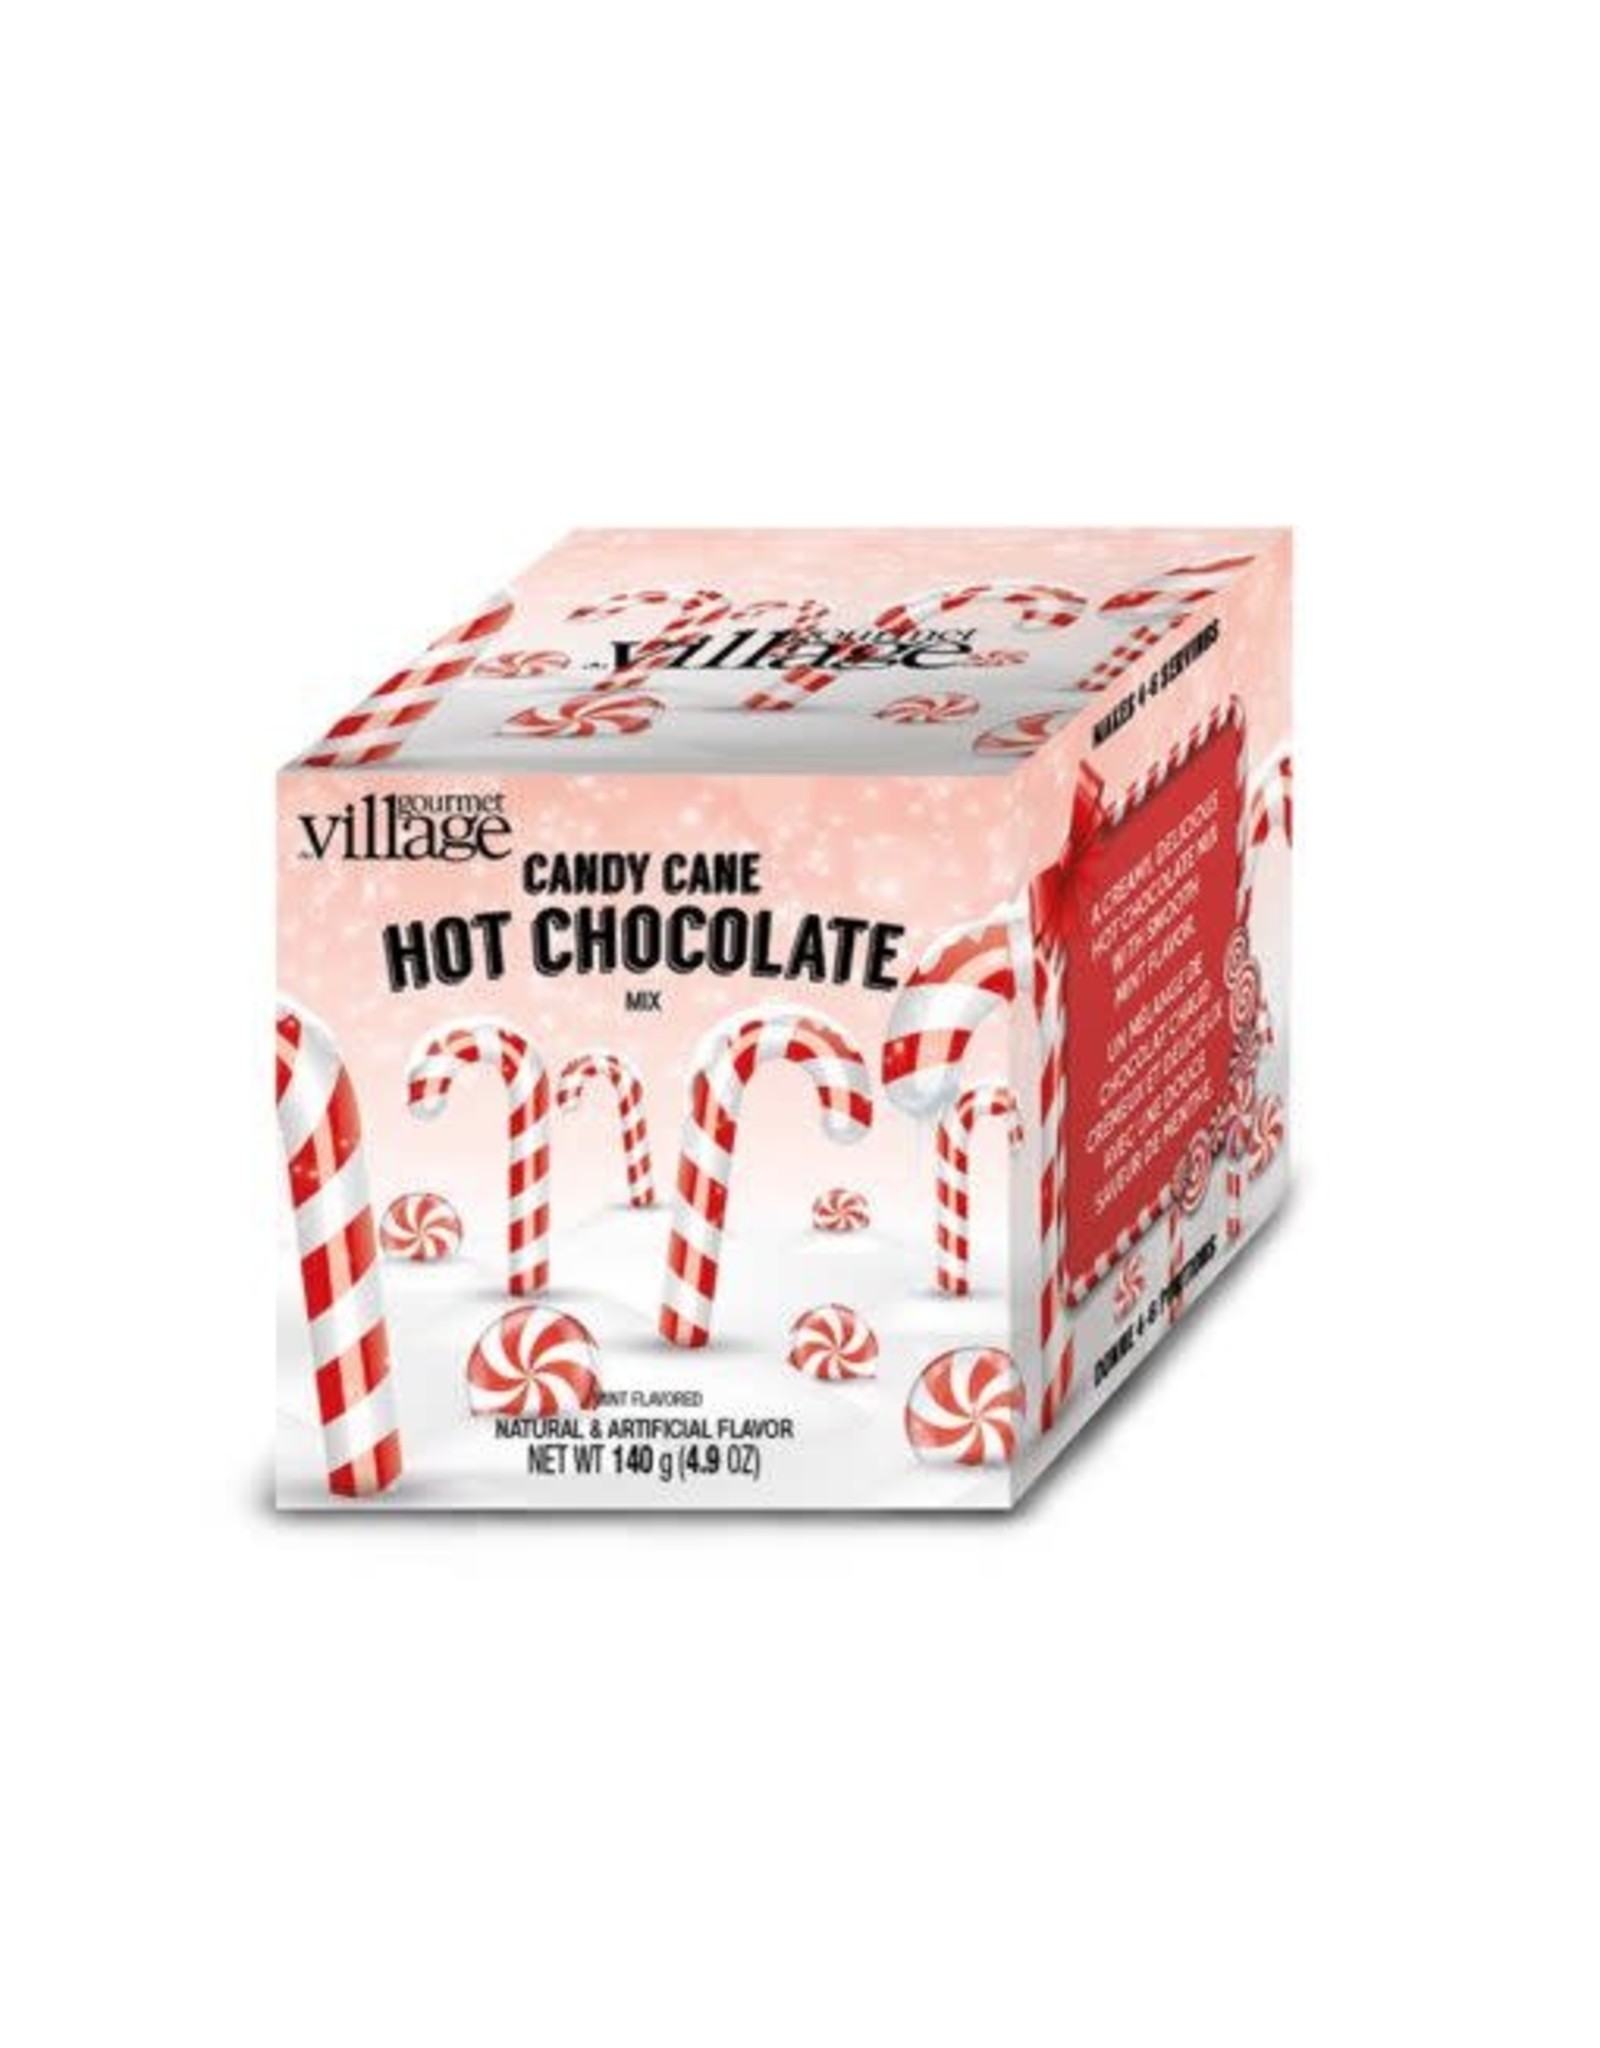 Gourmet Village Candy Cane Hot Chocolate Cube